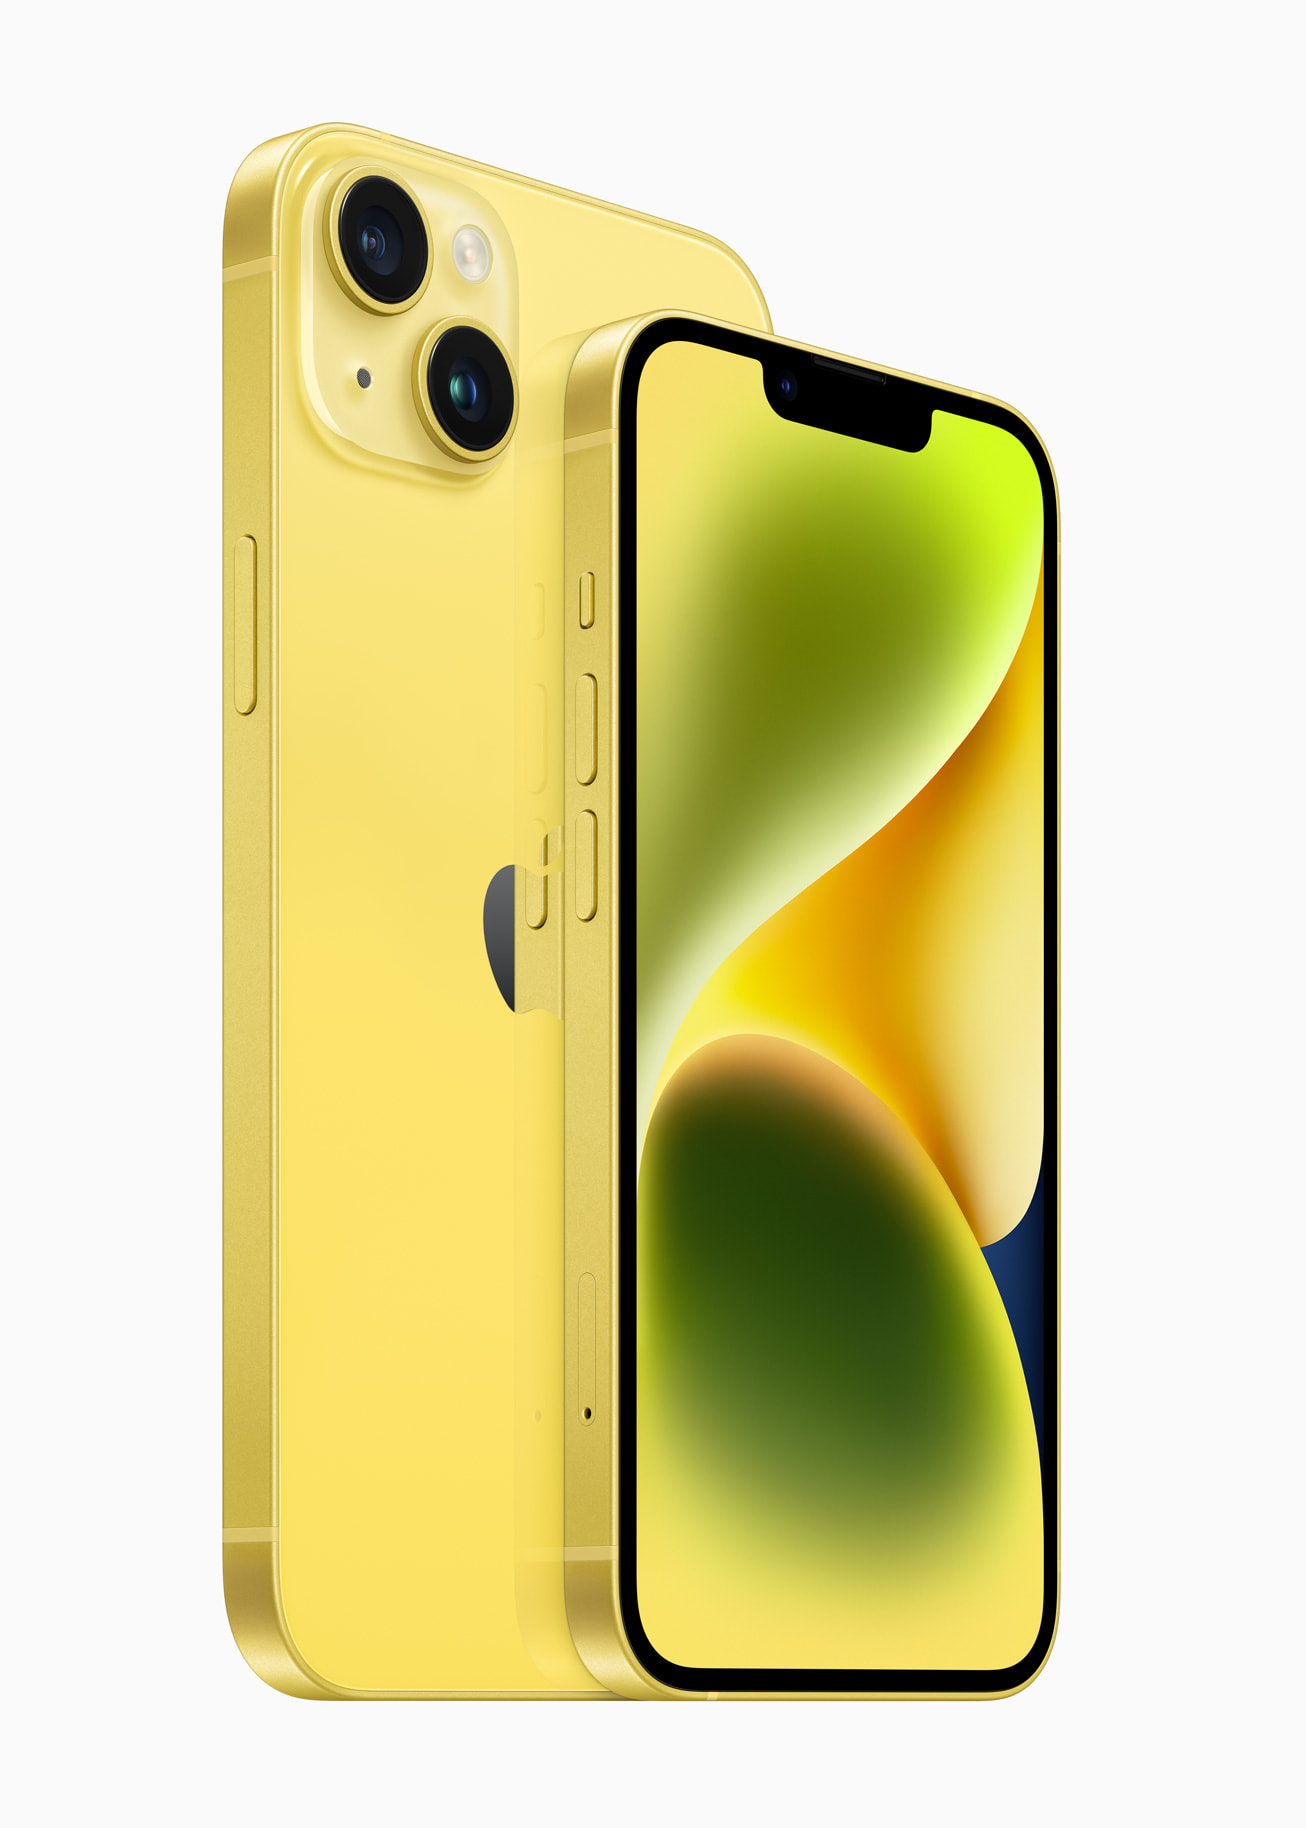 The iPhone 14 and iPhone 14 Plus in their new yellow finish